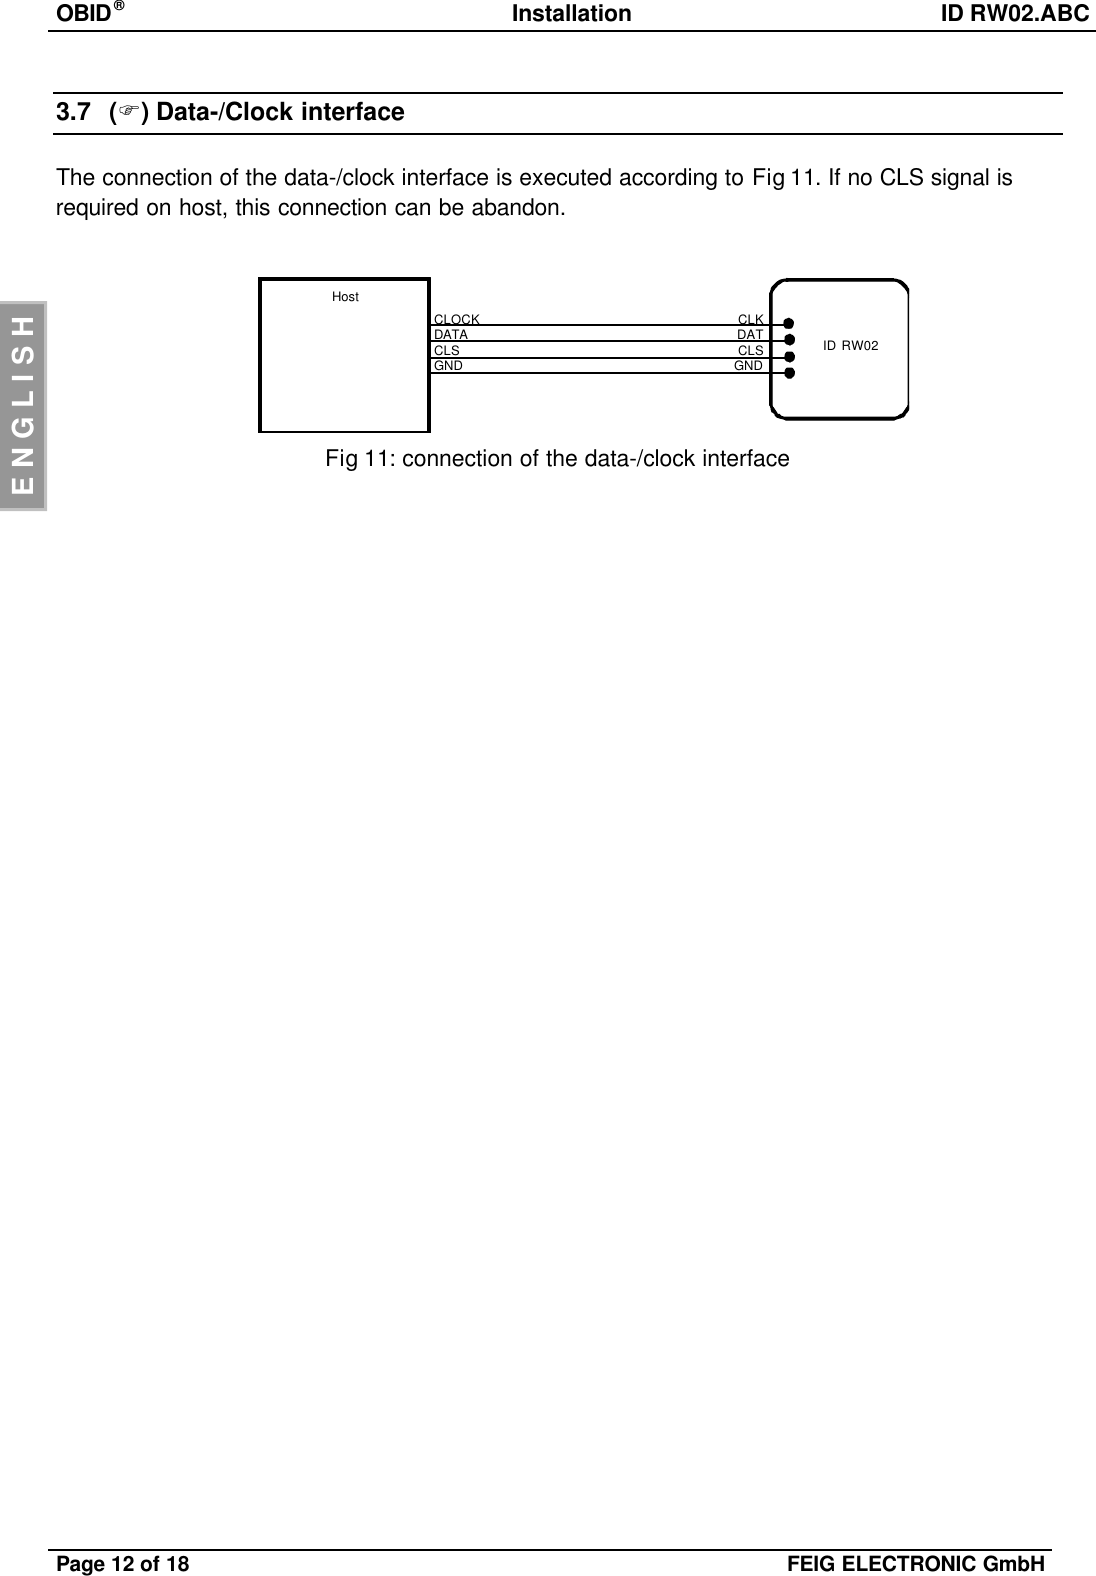 OBID®Installation ID RW02.ABCPage 12 of 18 FEIG ELECTRONIC GmbHENGLISH3.7 (F)Data-/Clock interfaceThe connection of the data-/clock interface is executed according to Fig 11. If no CLS signal isrequired on host, this connection can be abandon.Fig 11: connection of the data-/clock interfaceHostID RW02CLOCKDATACLSGNDCLKDATCLSGND